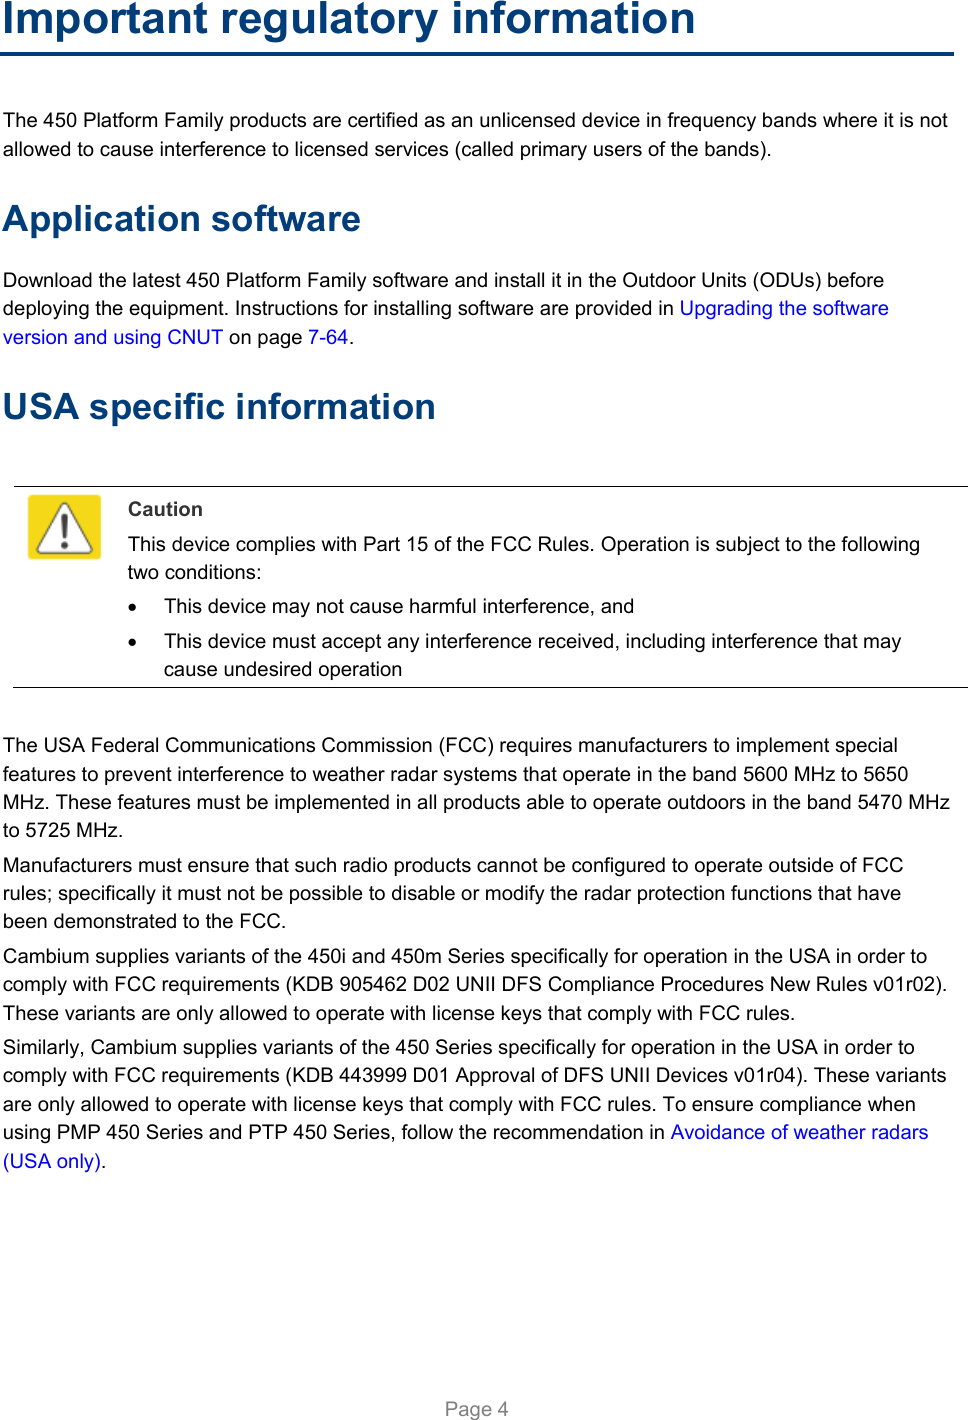   Page 4 Important regulatory information The 450 Platform Family products are certified as an unlicensed device in frequency bands where it is not allowed to cause interference to licensed services (called primary users of the bands). Application software Download the latest 450 Platform Family software and install it in the Outdoor Units (ODUs) before deploying the equipment. Instructions for installing software are provided in Upgrading the software version and using CNUT on page 7-64. USA specific information   Caution This device complies with Part 15 of the FCC Rules. Operation is subject to the following two conditions:   This device may not cause harmful interference, and   This device must accept any interference received, including interference that may cause undesired operation  The USA Federal Communications Commission (FCC) requires manufacturers to implement special features to prevent interference to weather radar systems that operate in the band 5600 MHz to 5650 MHz. These features must be implemented in all products able to operate outdoors in the band 5470 MHz to 5725 MHz. Manufacturers must ensure that such radio products cannot be configured to operate outside of FCC rules; specifically it must not be possible to disable or modify the radar protection functions that have been demonstrated to the FCC. Cambium supplies variants of the 450i and 450m Series specifically for operation in the USA in order to comply with FCC requirements (KDB 905462 D02 UNII DFS Compliance Procedures New Rules v01r02). These variants are only allowed to operate with license keys that comply with FCC rules.  Similarly, Cambium supplies variants of the 450 Series specifically for operation in the USA in order to comply with FCC requirements (KDB 443999 D01 Approval of DFS UNII Devices v01r04). These variants are only allowed to operate with license keys that comply with FCC rules. To ensure compliance when using PMP 450 Series and PTP 450 Series, follow the recommendation in Avoidance of weather radars (USA only).  